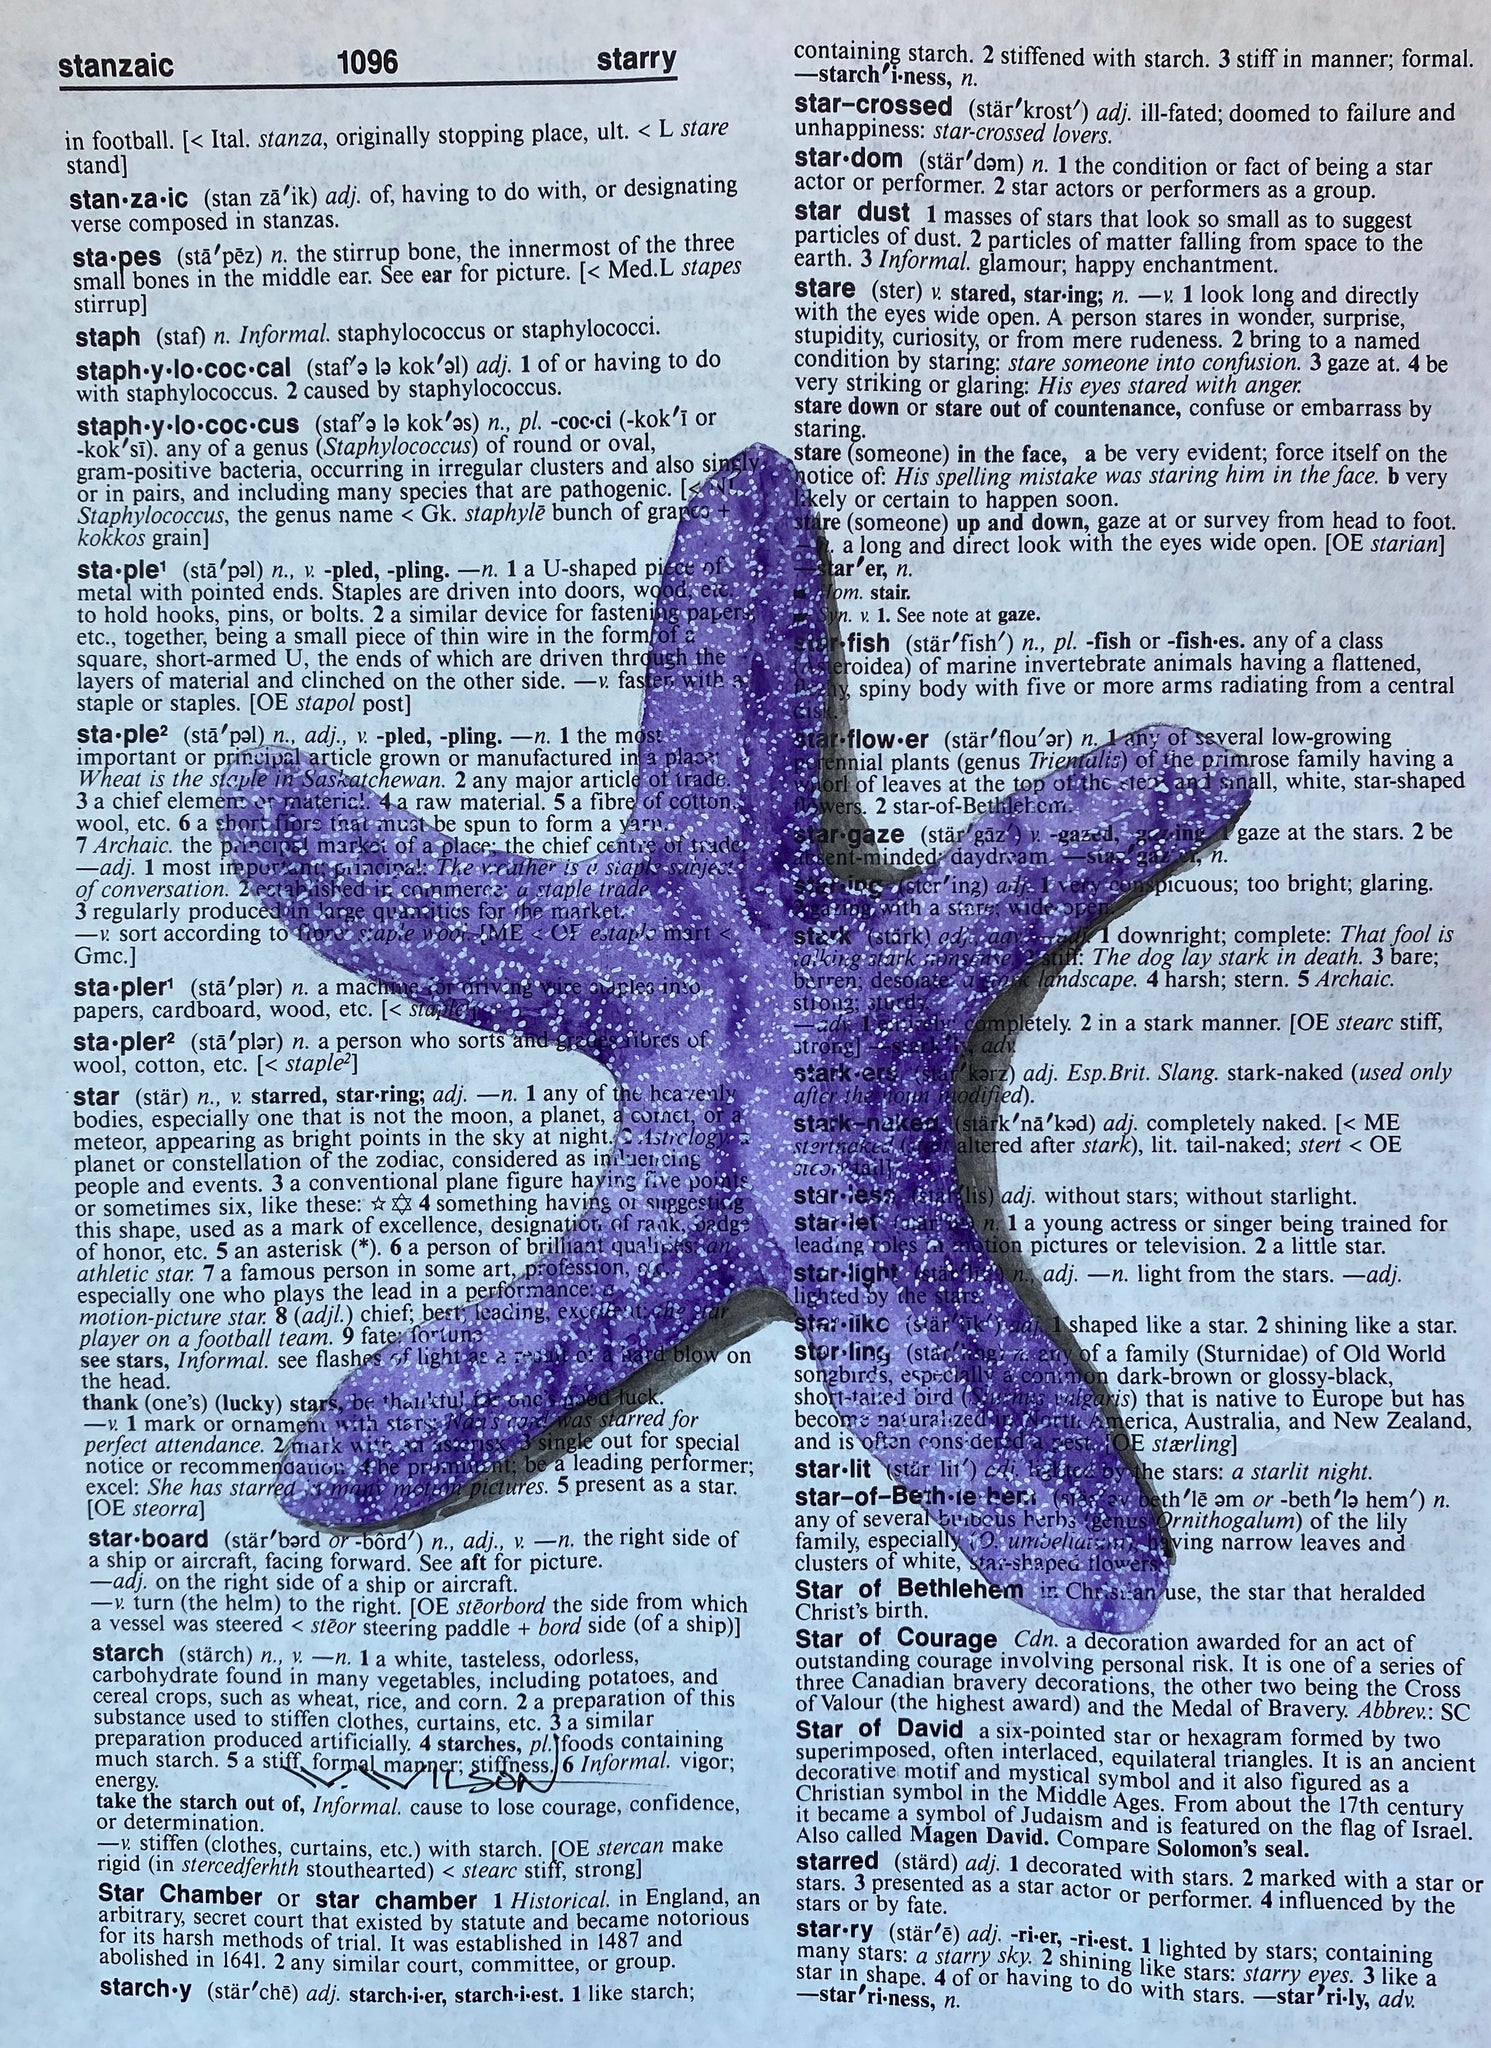 ‘S’is for Starfish